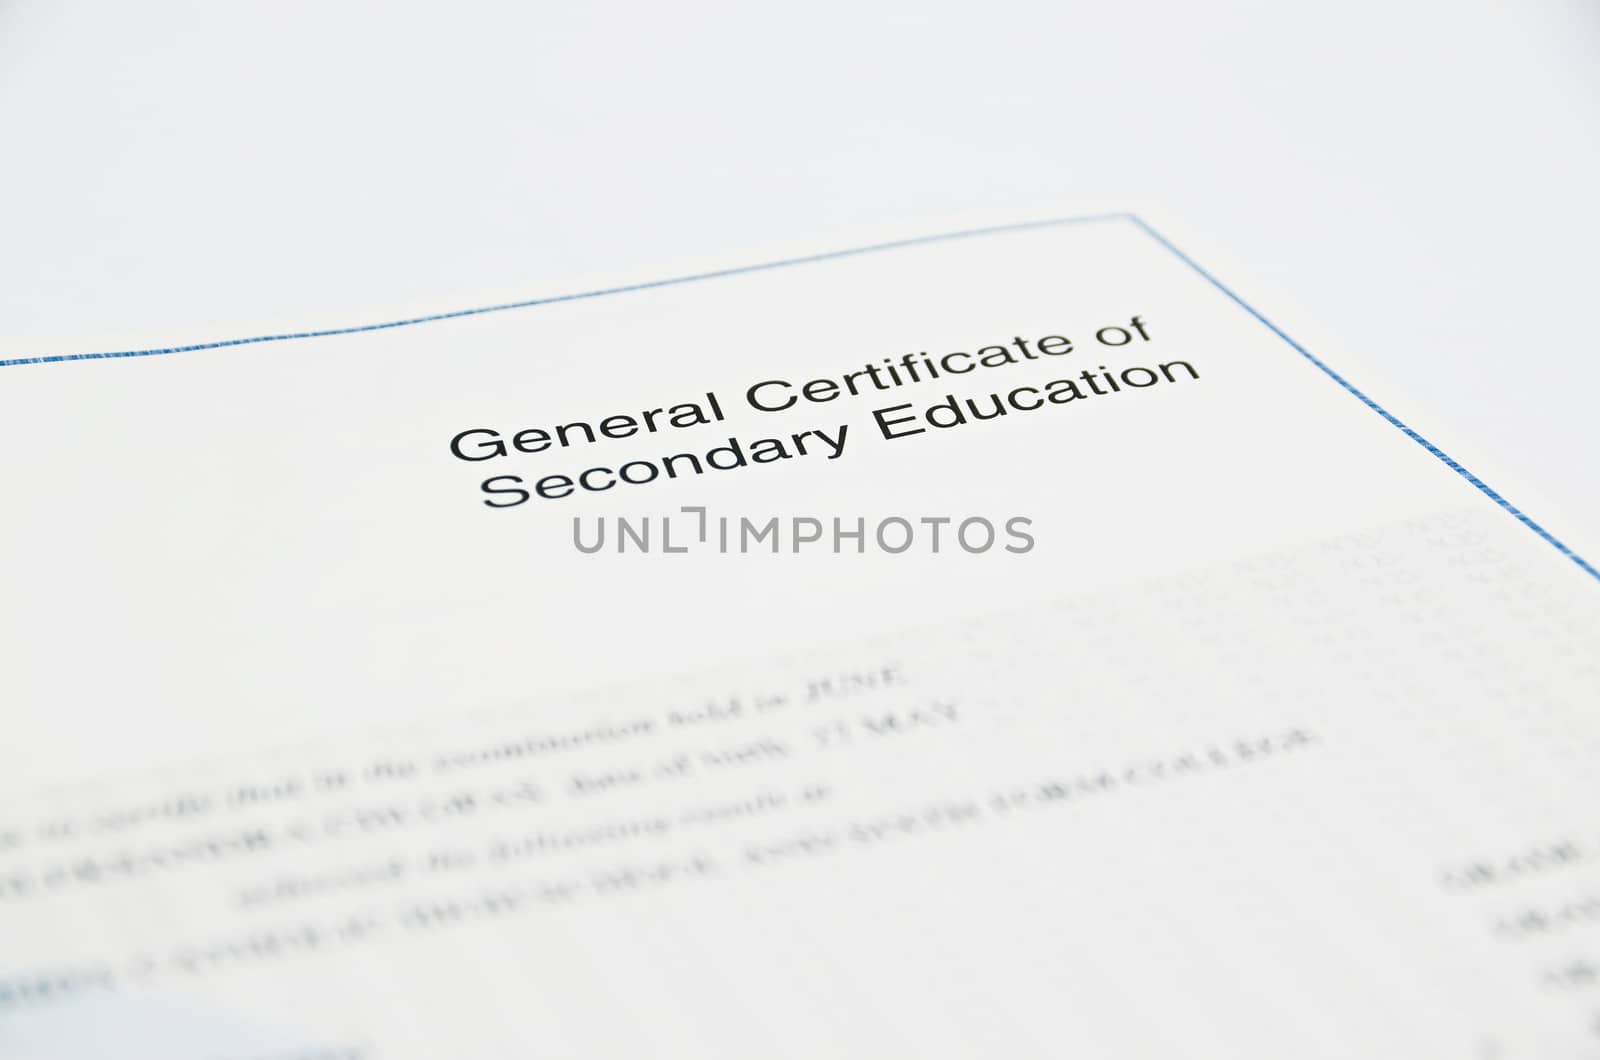 General Certificate of Secondary Education

